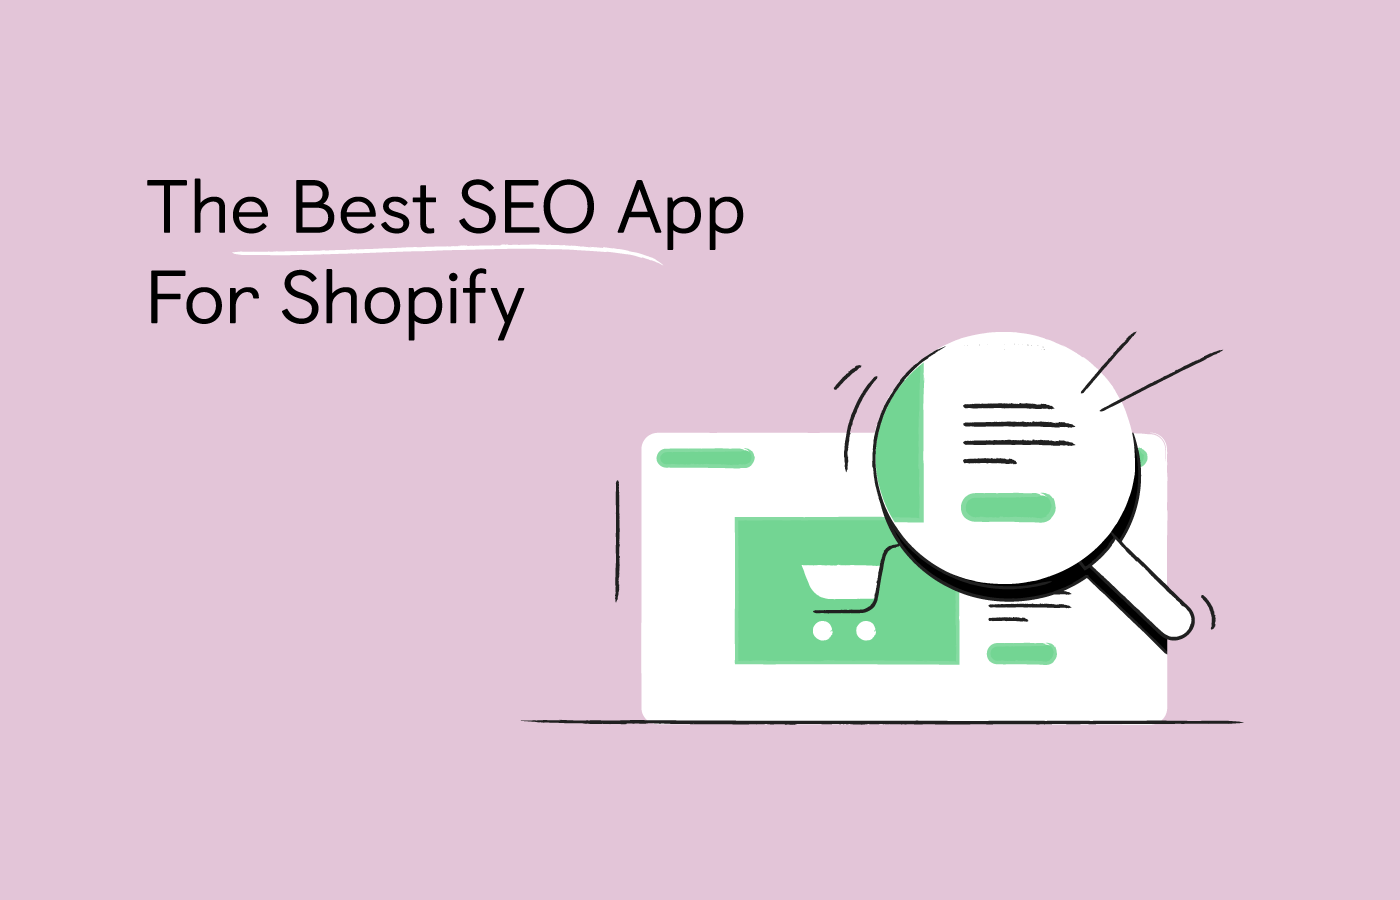 Shopify SEO: 5 Killer Ways To Optimize Your Store To Get More Traffic!